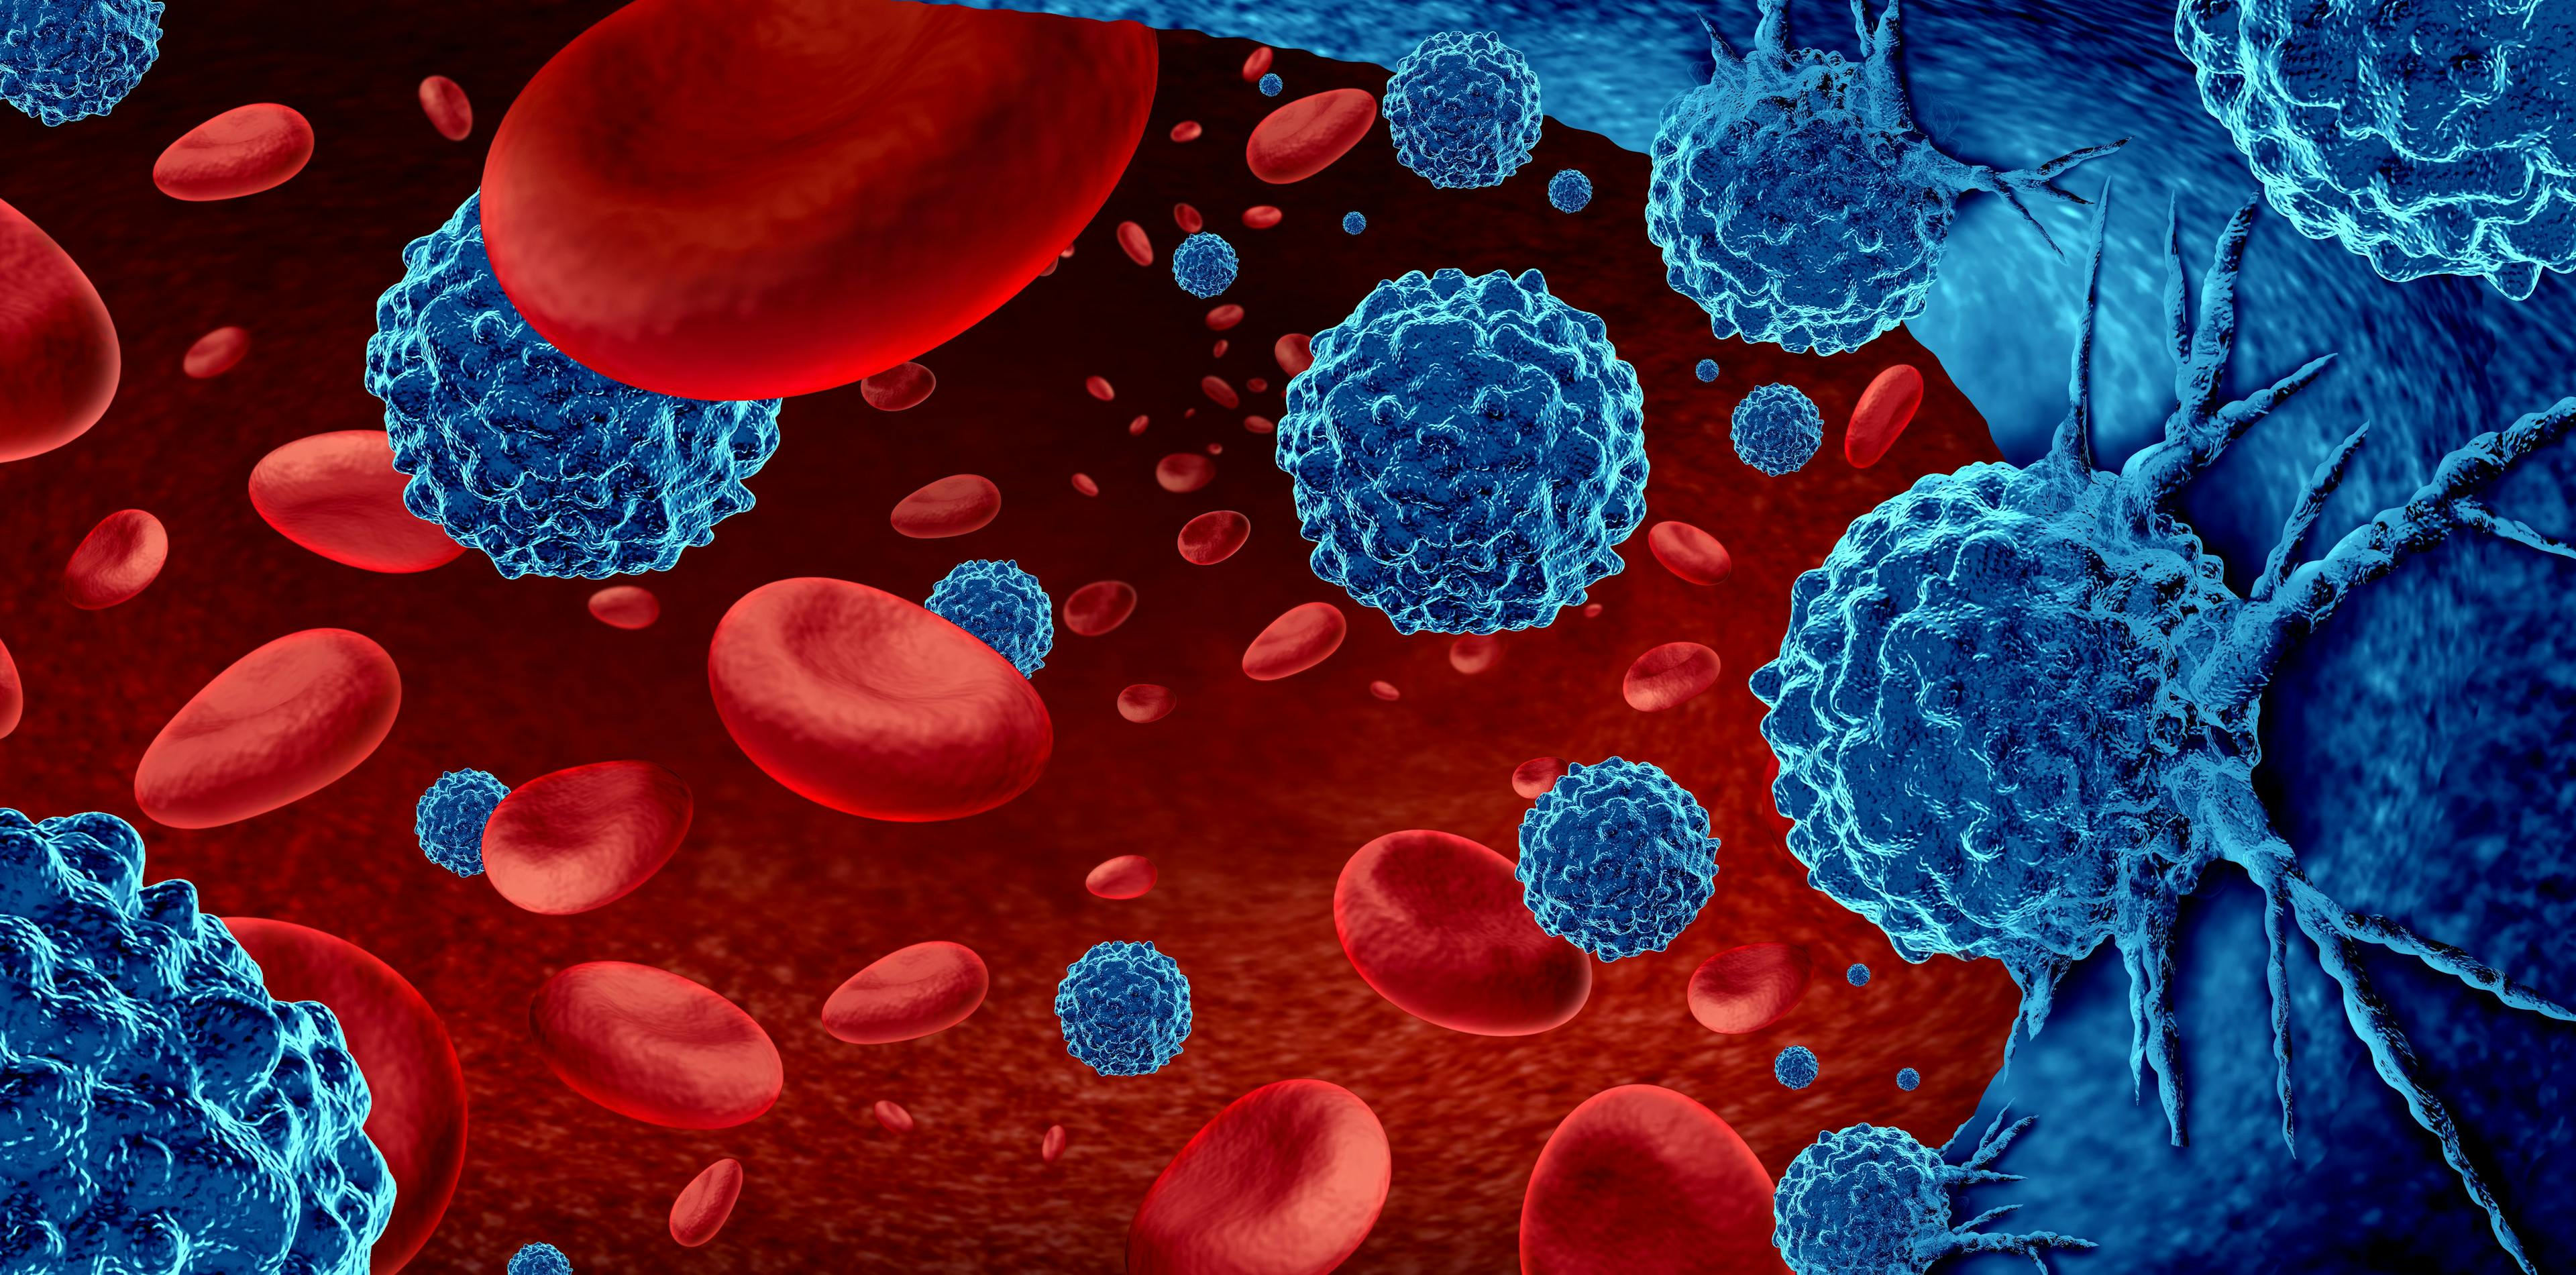 Cancer in the blood outbreak and treatment for malignant cells in a human body caused by carcinogens and genetics with a cancerous cell as an immunotherapy and leukemia or lymphoma symbol and medical | Image Credit: © freshidea - www.stock.adobe.com